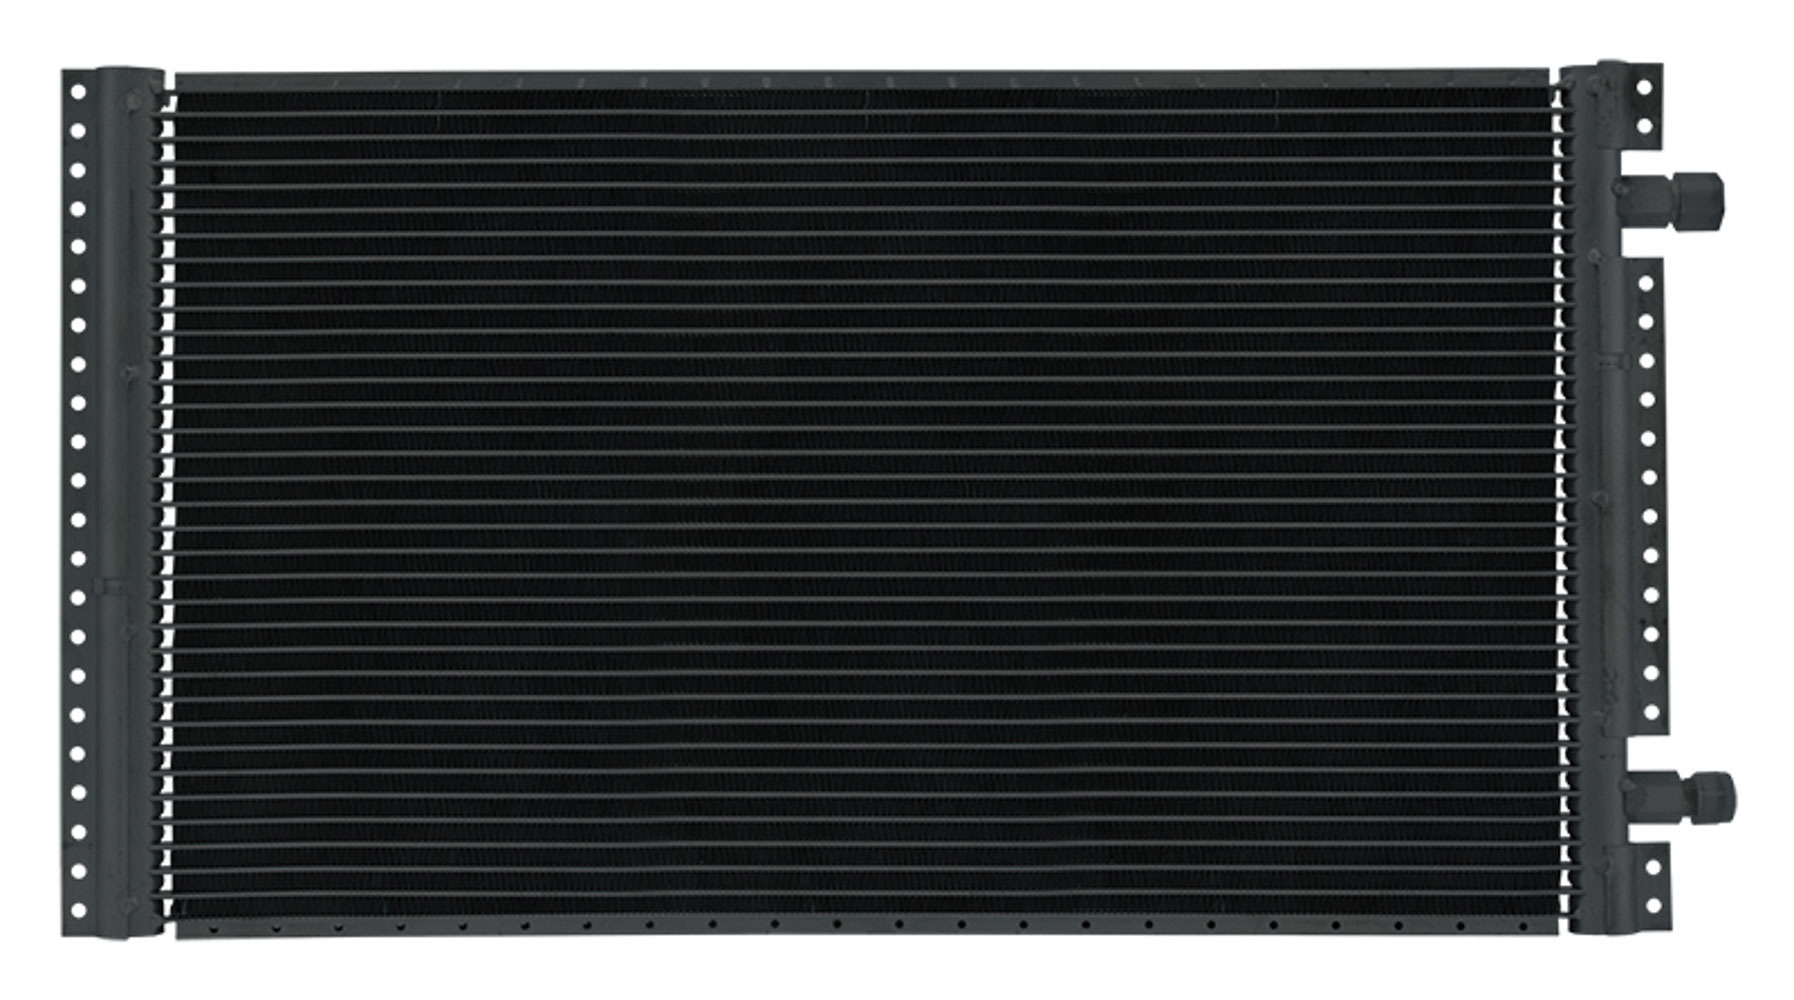 Cold Case Radiators RSAC01B Air Conditioning Condenser, Horizontal, 26 x 14 in, Black, Each